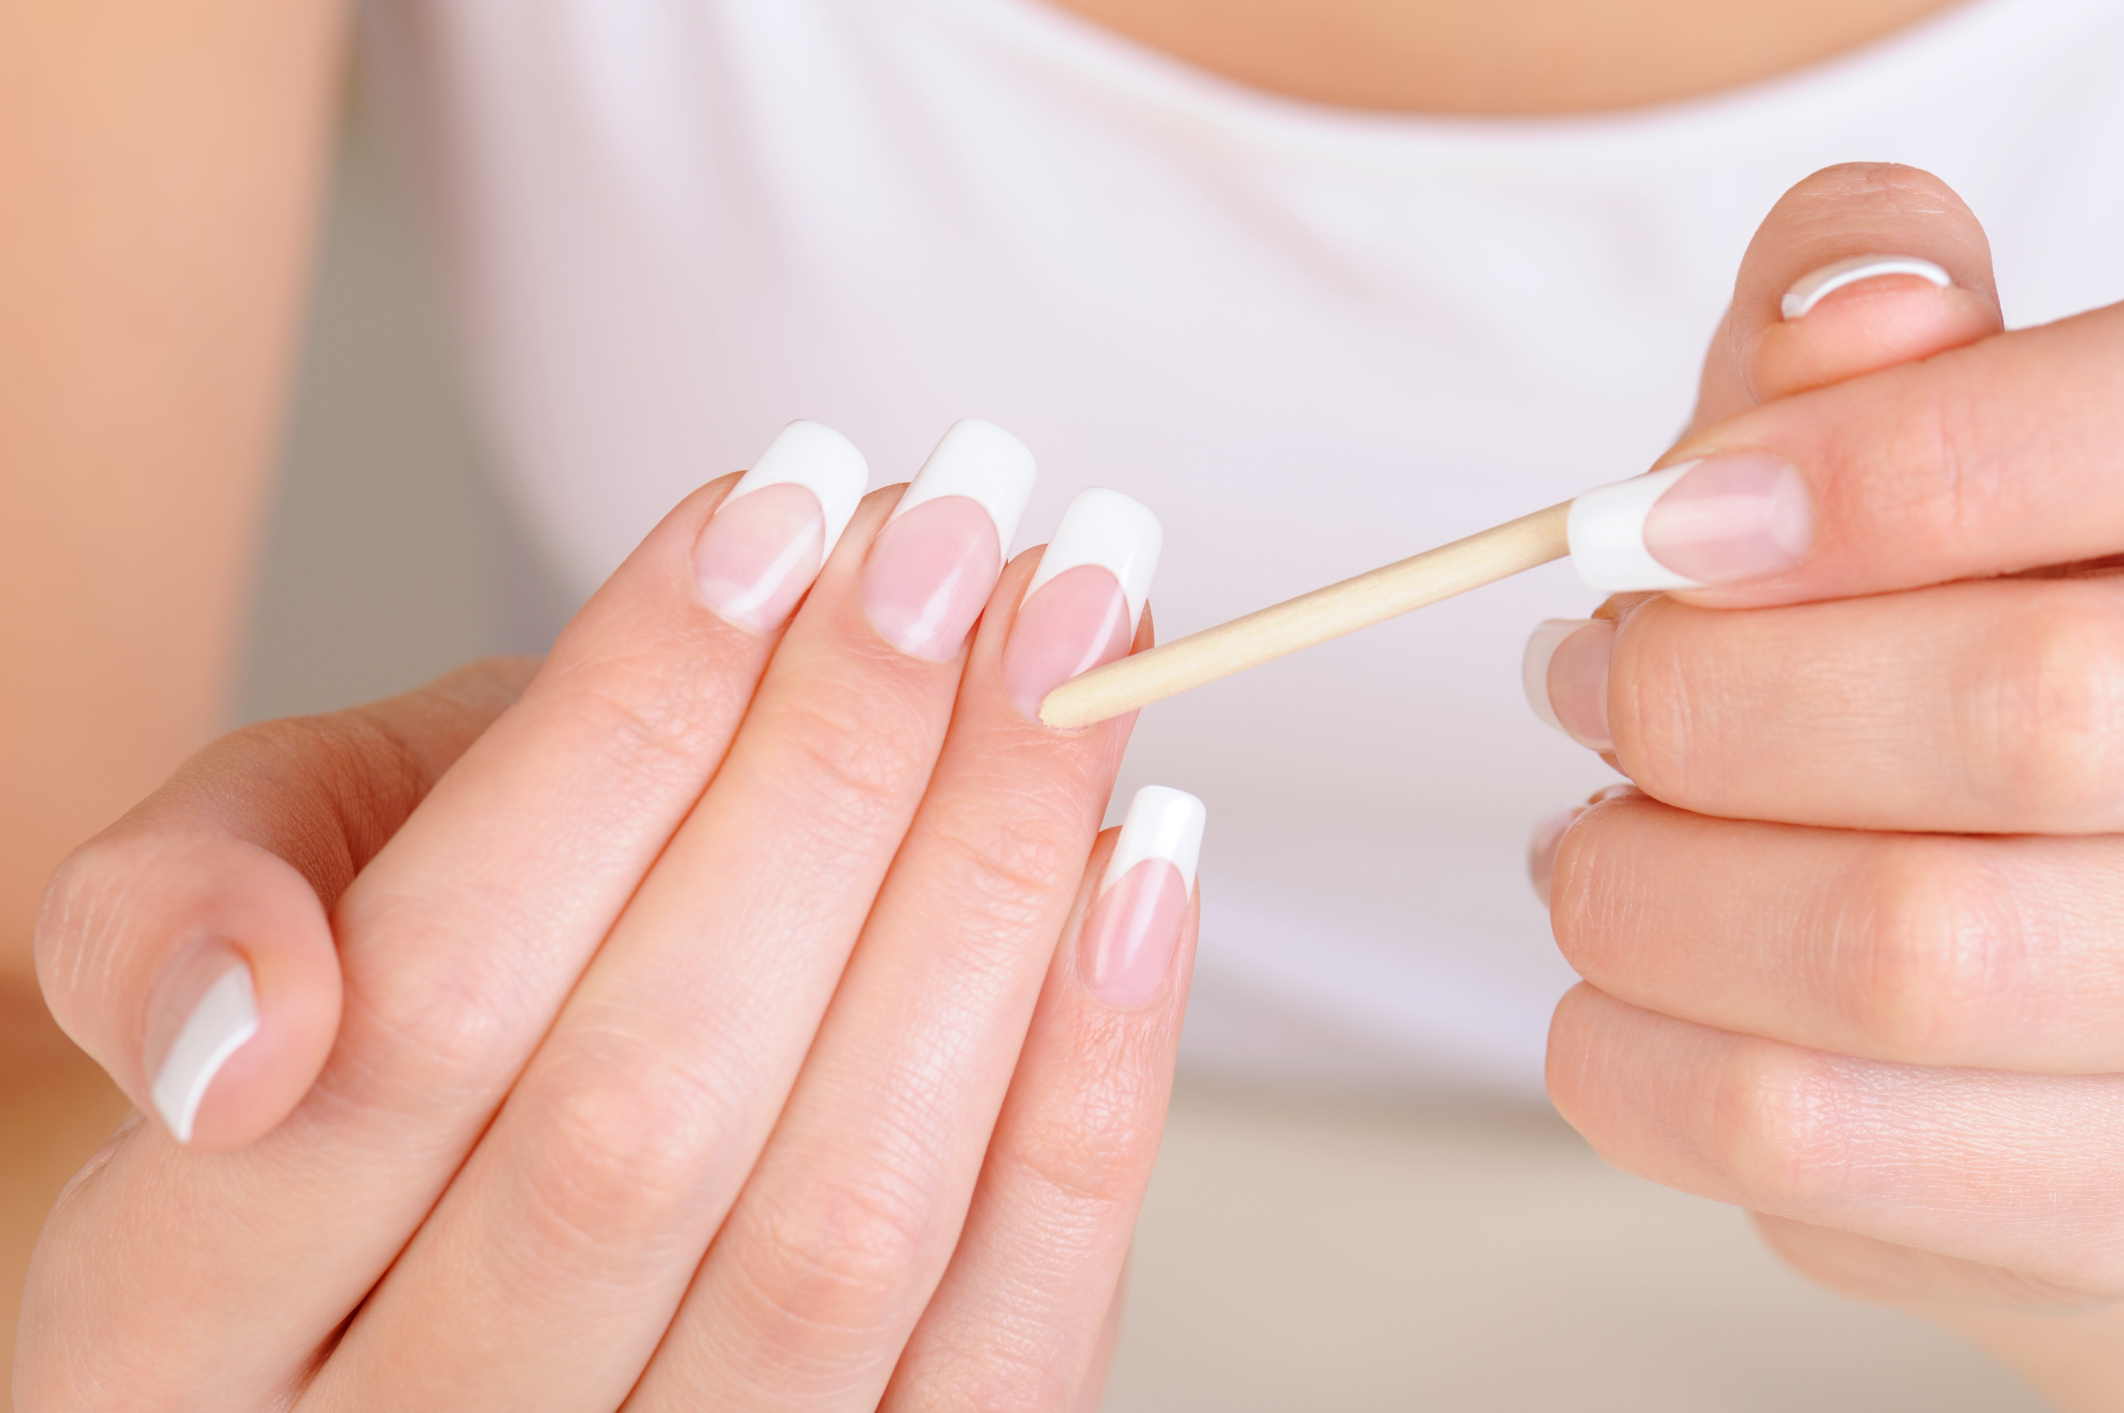 8. "Pastel shades like lavender or mint can make short toenails appear longer and more delicate" - wide 5